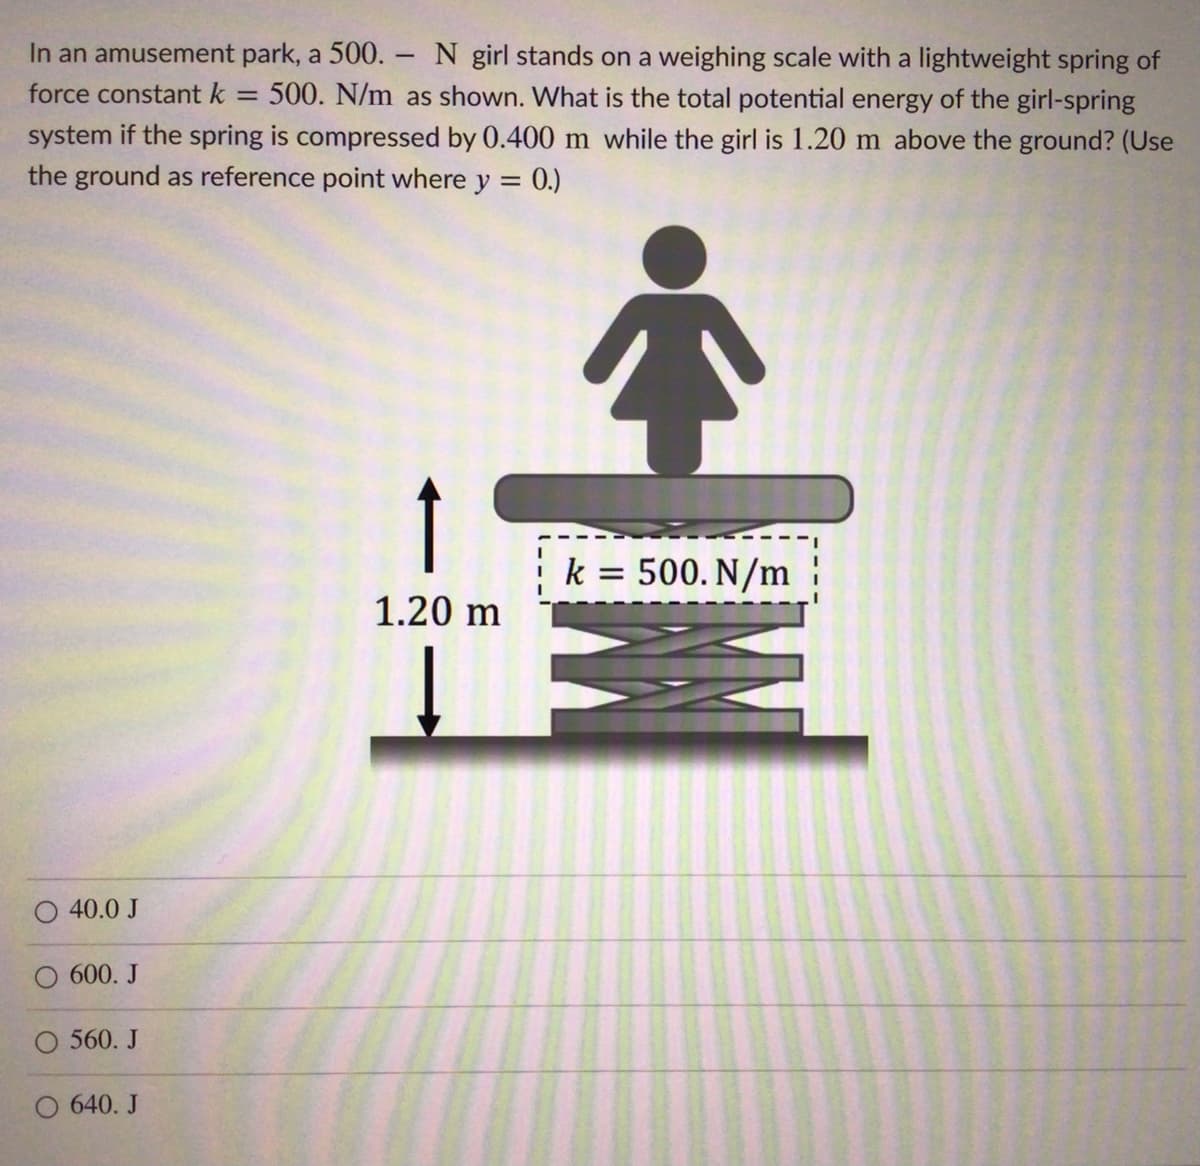 In an amusement park, a 500. N girl stands on a weighing scale with a lightweight spring of
force constant k
500. N/m as shown. What is the total potential energy of the girl-spring
system if the spring is compressed by 0.400 m while the girl is 1.20 m above the ground? (Use
the ground as reference point where y = 0.)
k = 500. N/m
1.20 m
40.0 J
600. J
O 560. J
O 640. J
